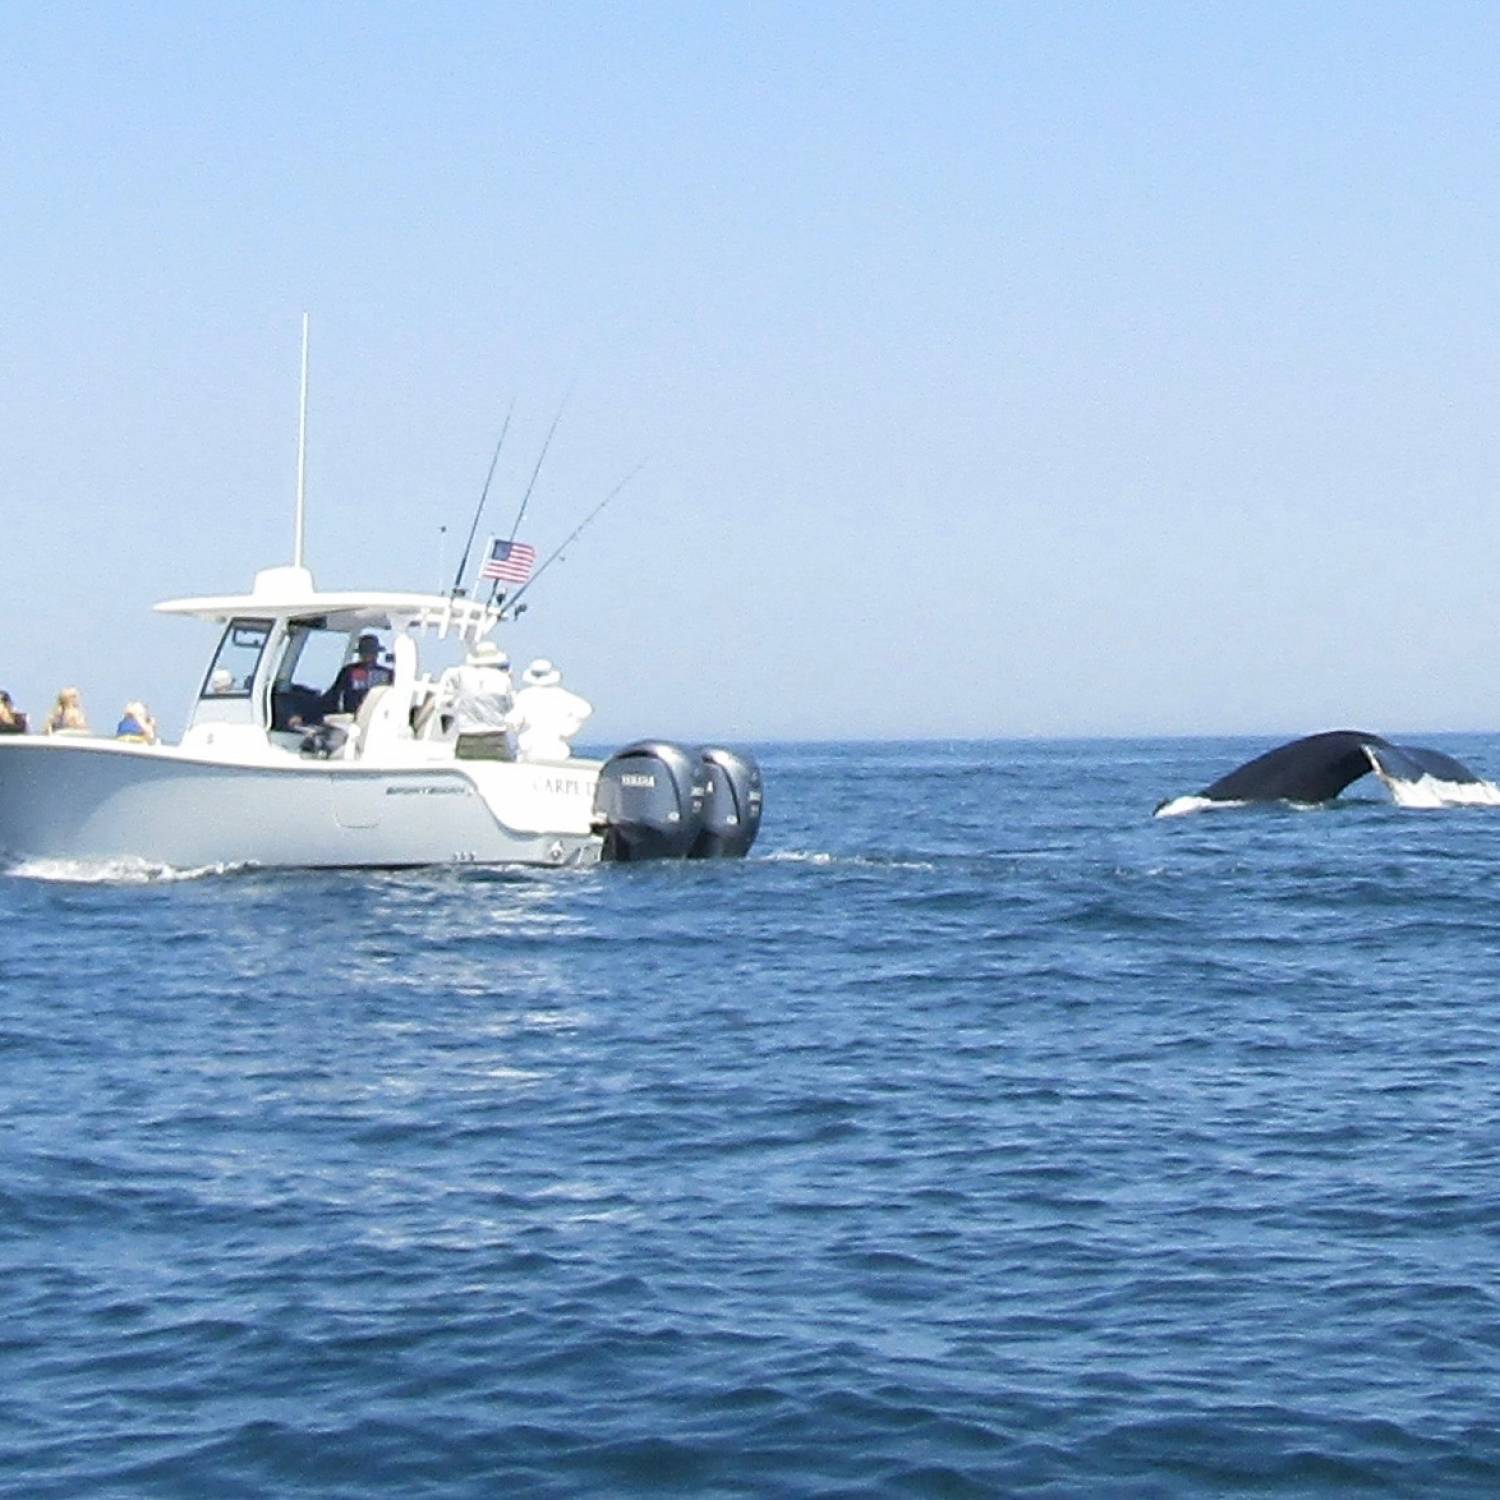 The excitement of a whale surfacing next to you when you are out fishing with the family!